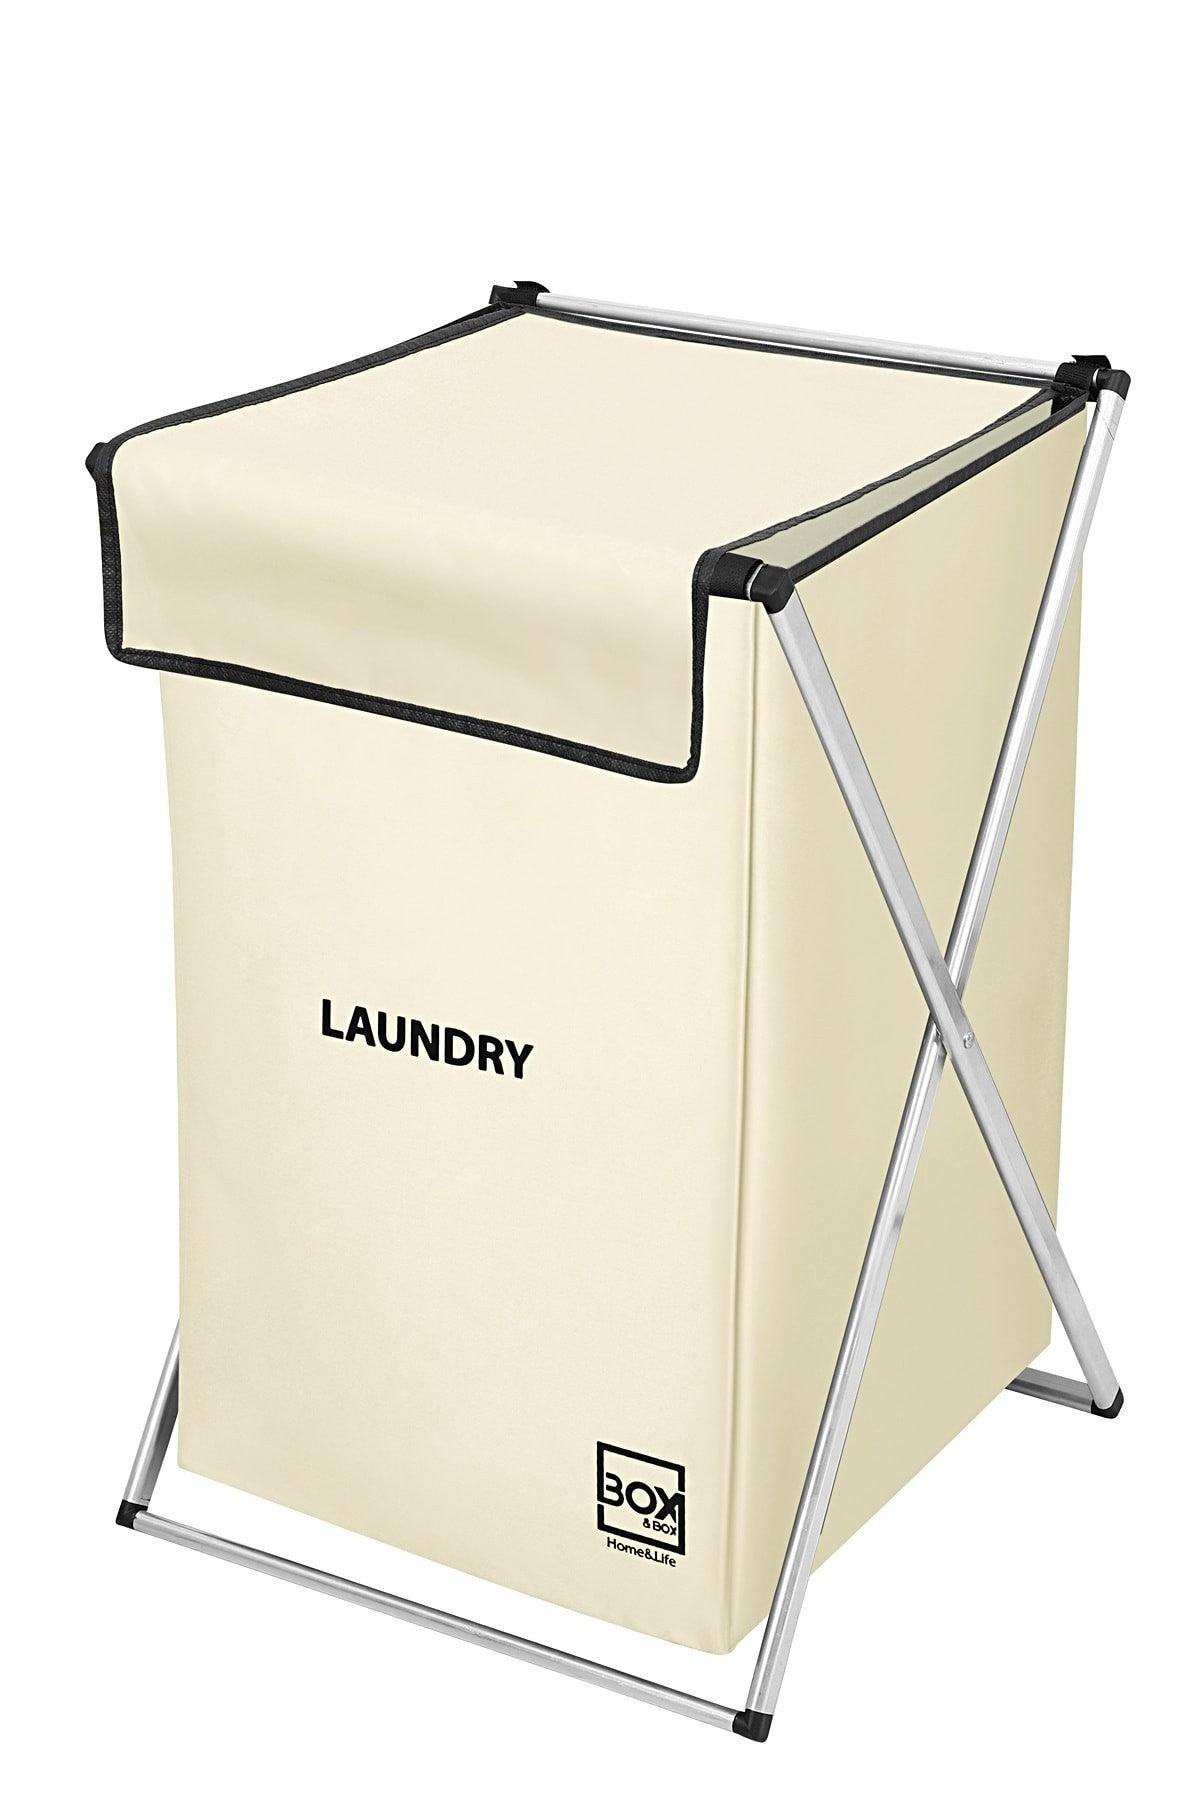 Single Compartment Laundry And Dirty Basket, Cream, Machine Washable Fabric Bag, 39x42x58 Cm - Swordslife